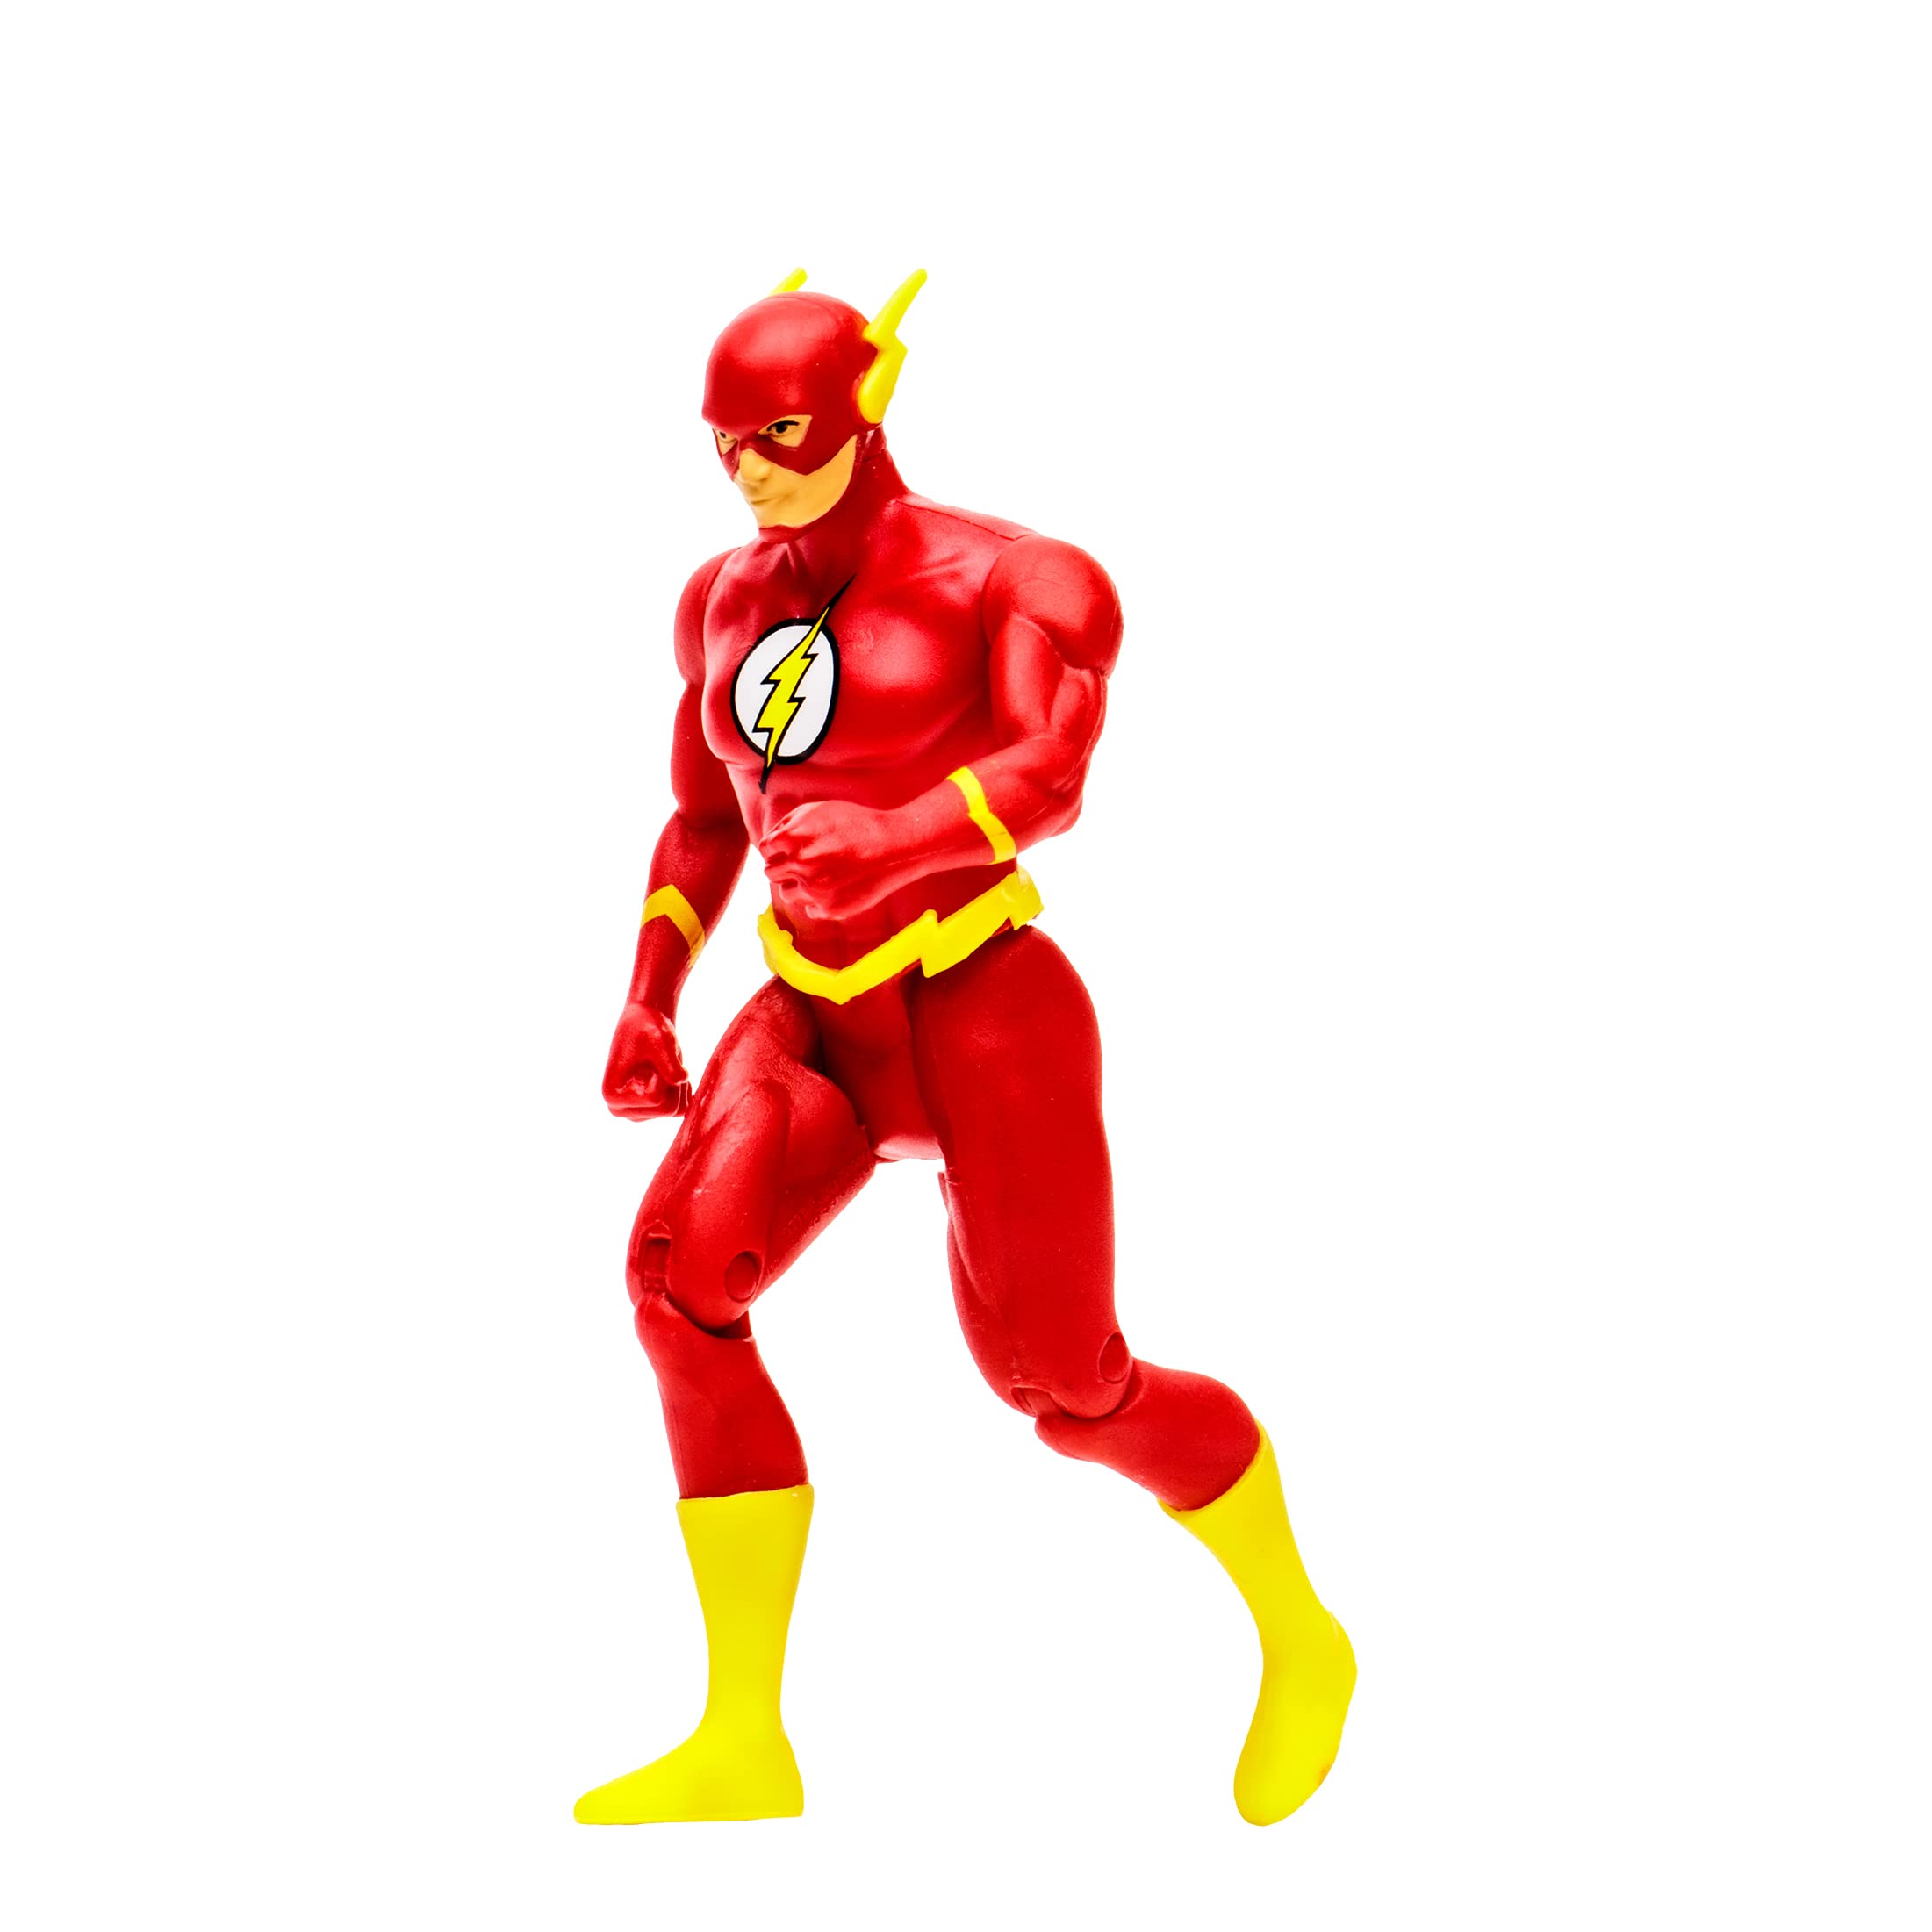 McFarlane Toys, DC Multiverse, 5-inch DC Rebirth Super Powers The Flash Action Figure with 5 Points of articulations, Collectible DC Retro 1980’s Super Powers Line Figure – Ages 12+